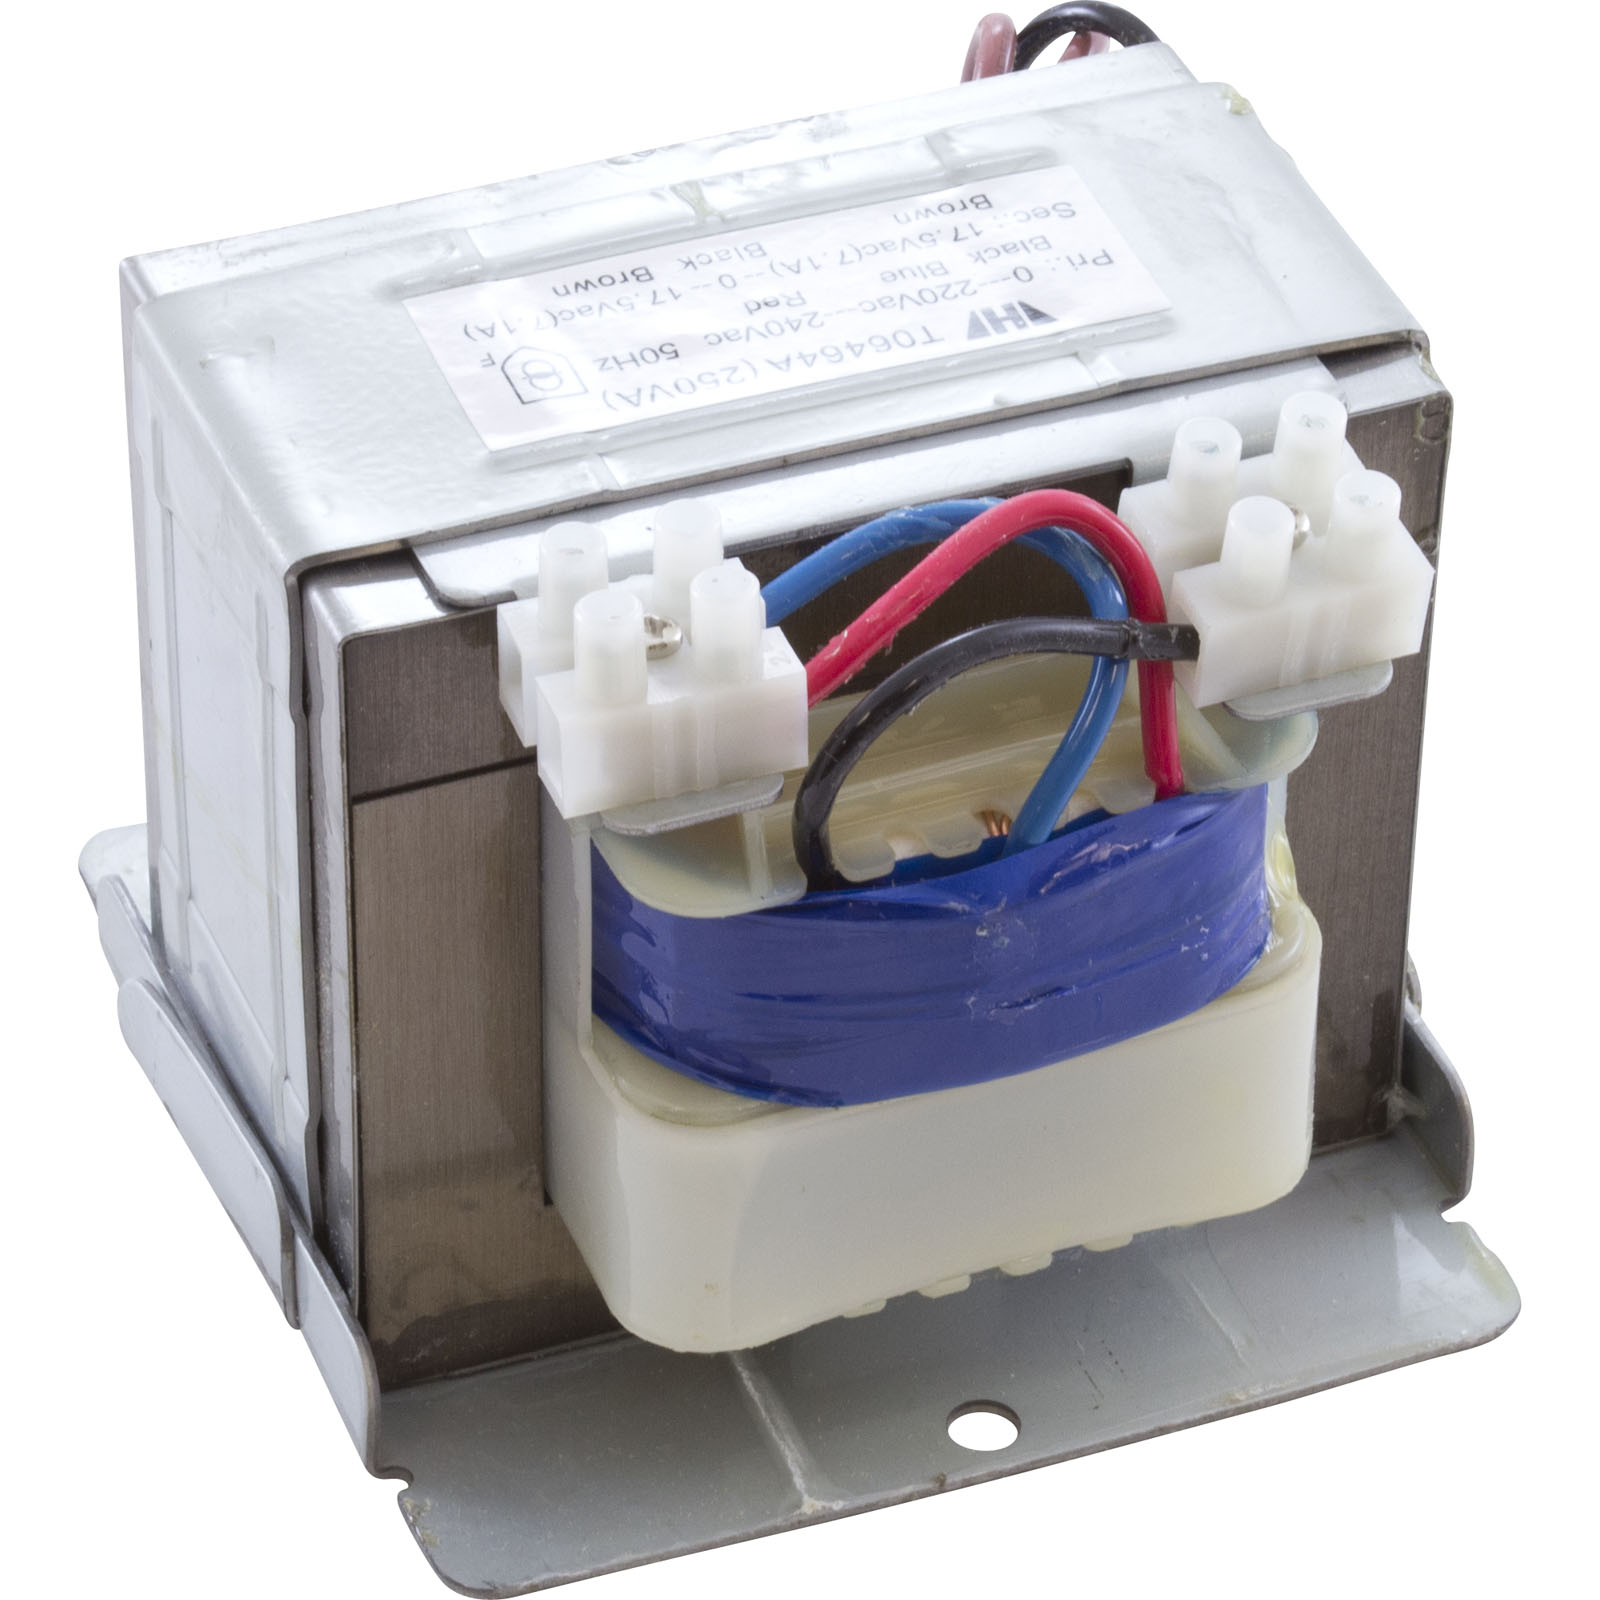 Picture of Transformer, Zodiac, Clearwater LM3-15, 24, 230v, 165.v